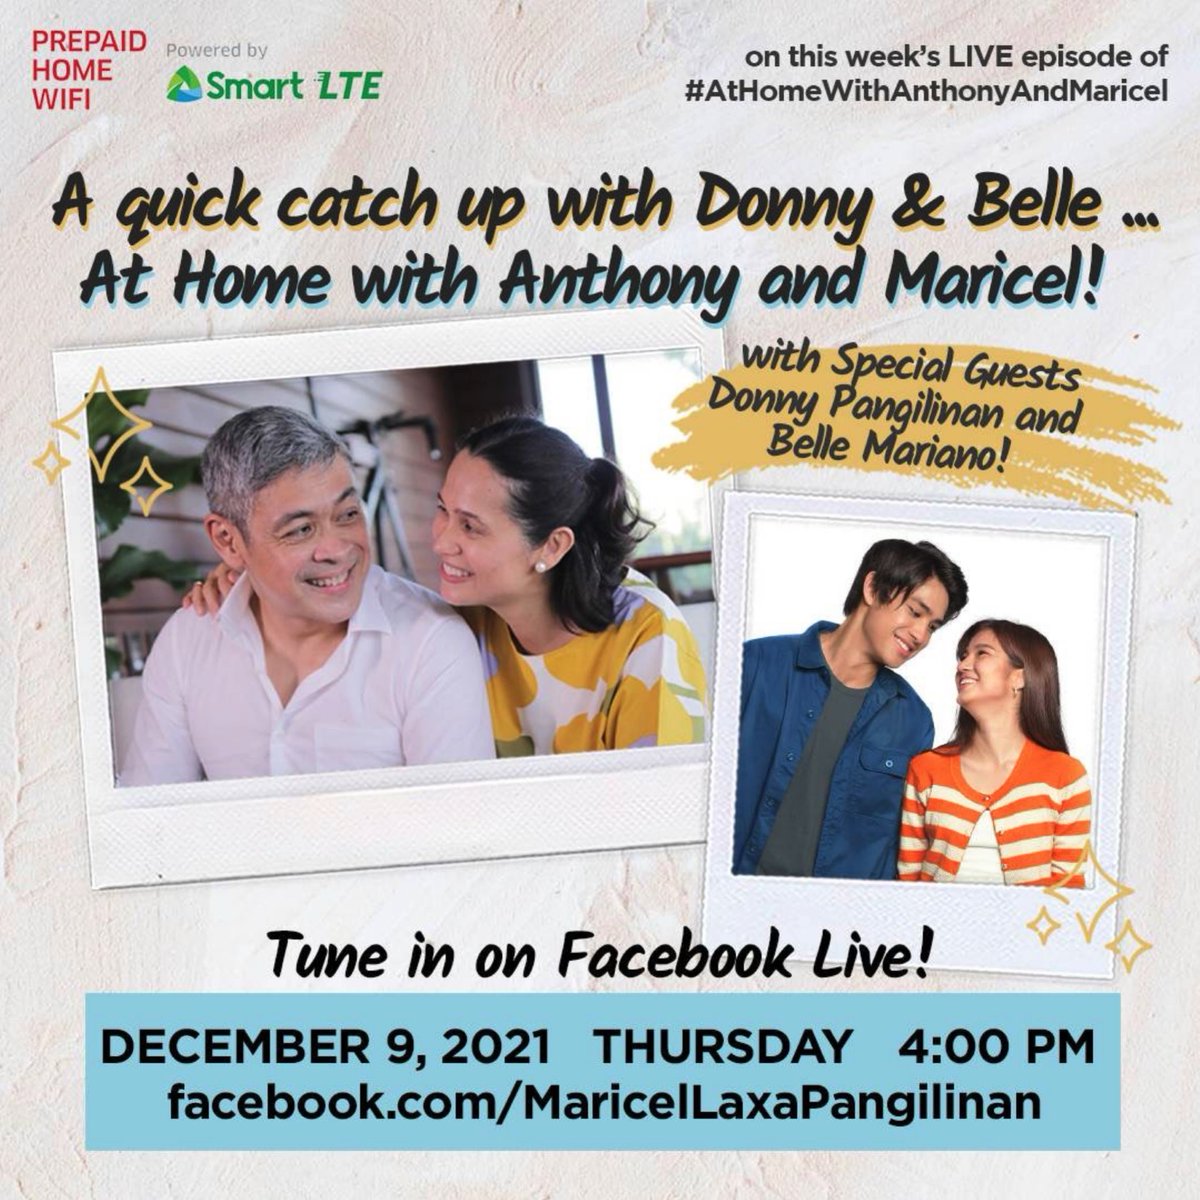 RT @DonnyEvents: Catch @donnypangilinan and Belle live now on #AtHomeWithAnthonyAndMaricel 

https://t.co/Da9d5Zozej https://t.co/ceICl4crio